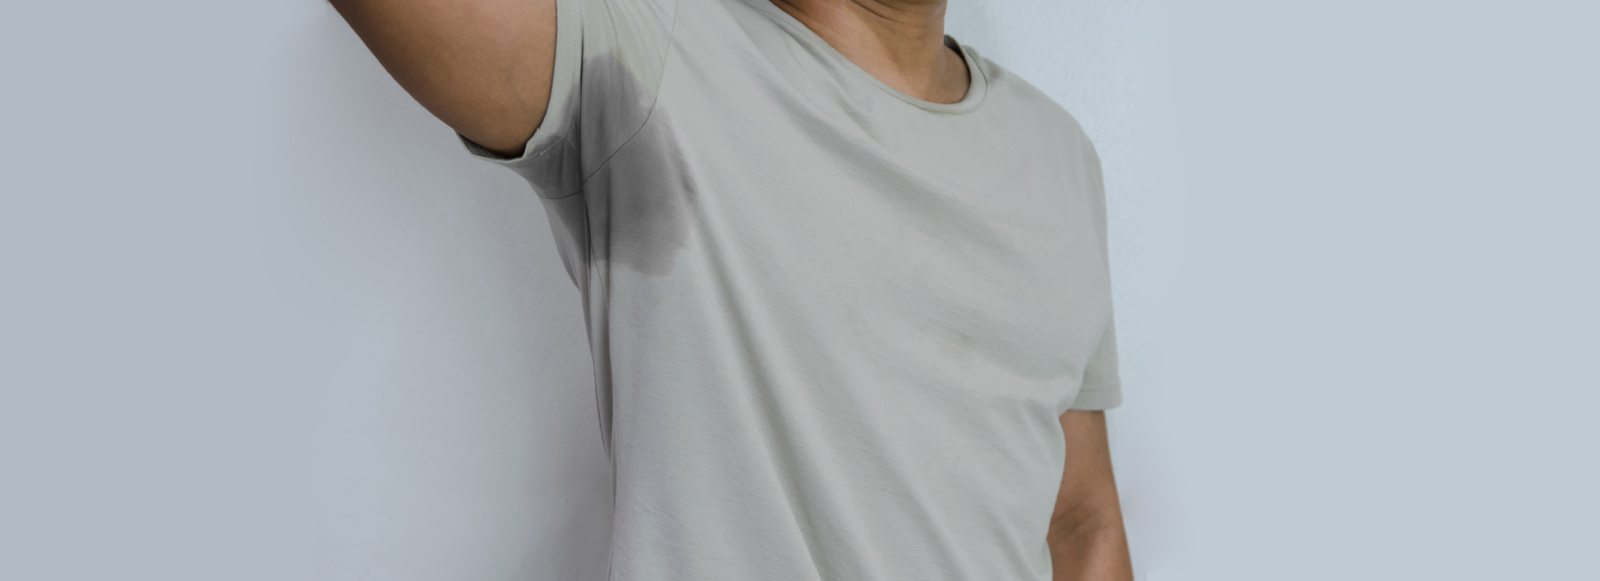 Botox For Excessive Sweating: What you Need to Know